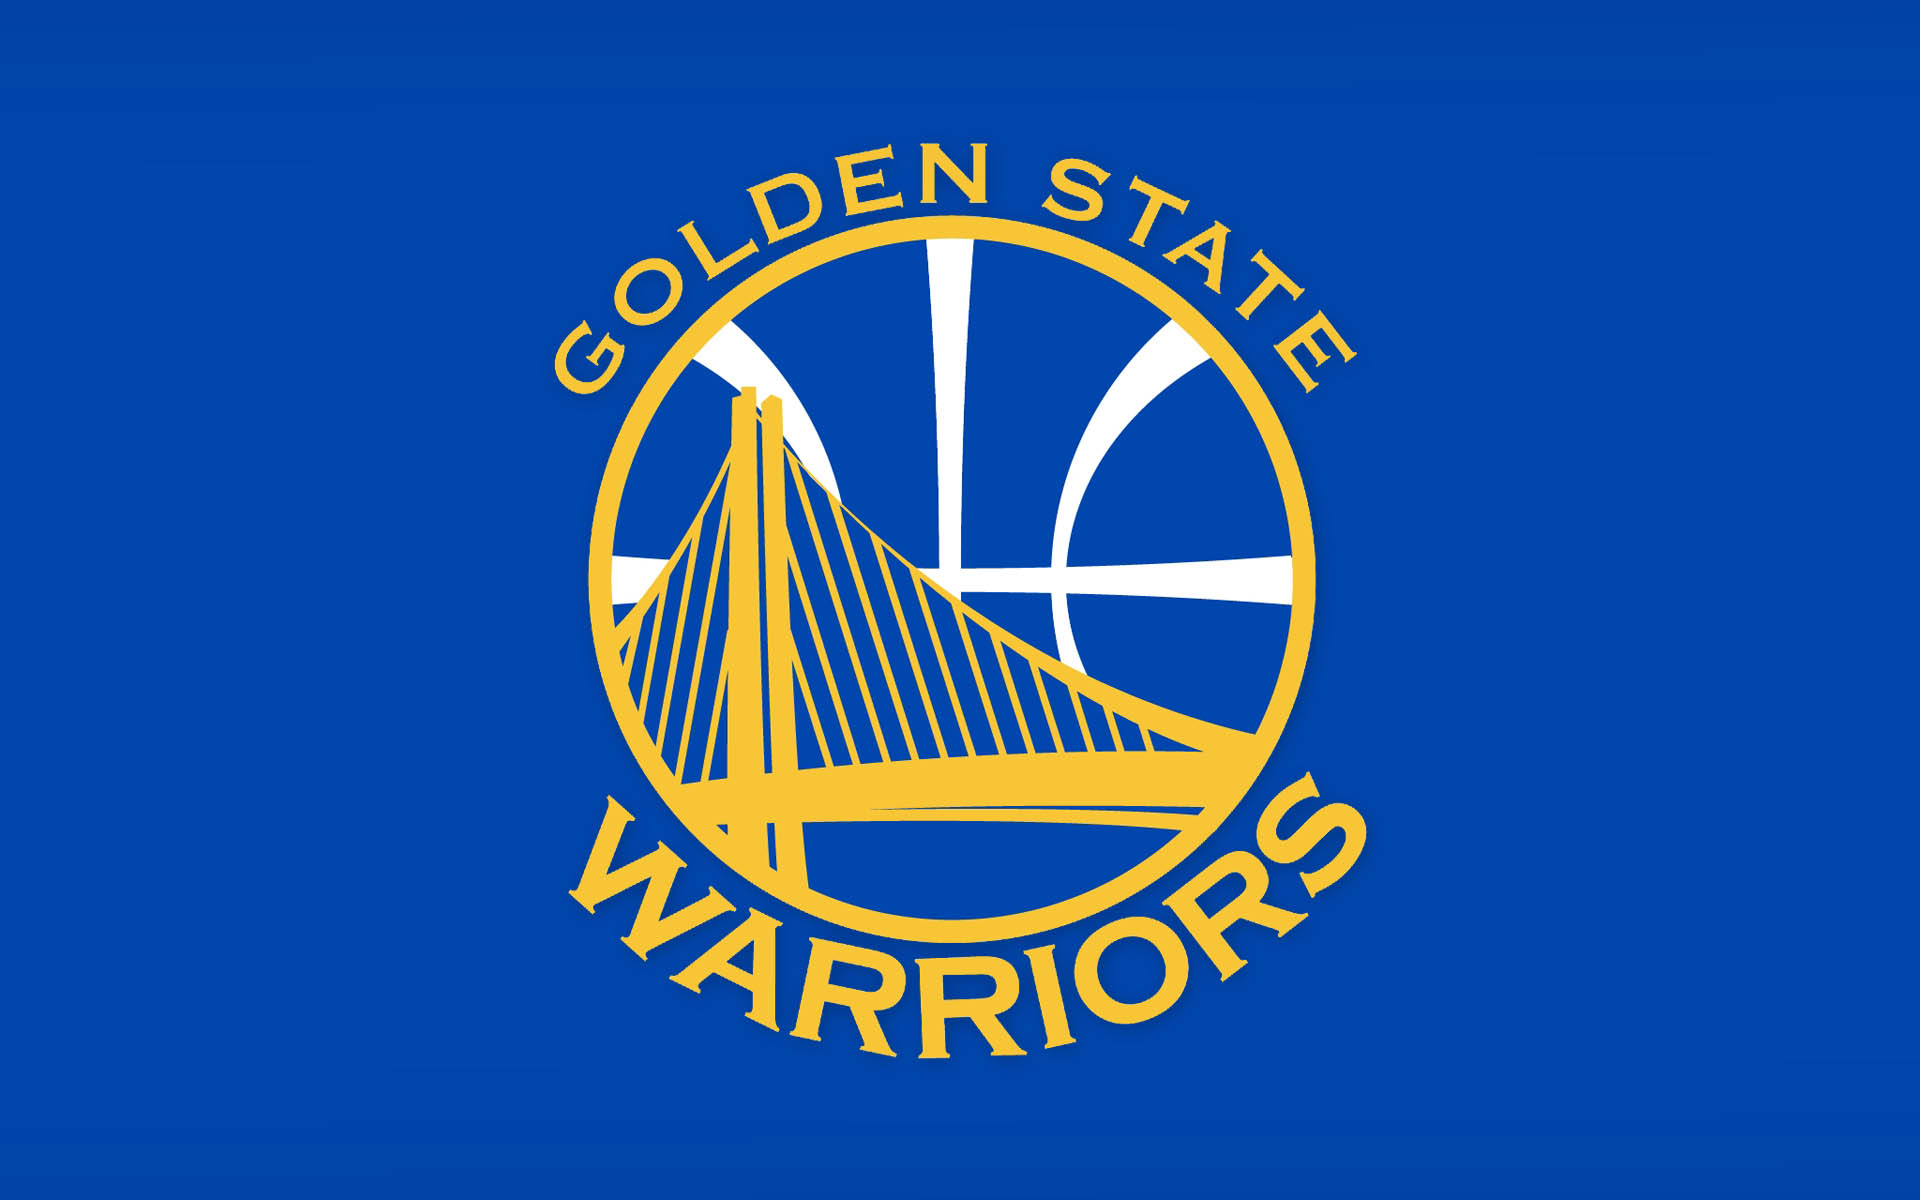 Golden State Warriors Wallpaper Pics Pictures Image Photos